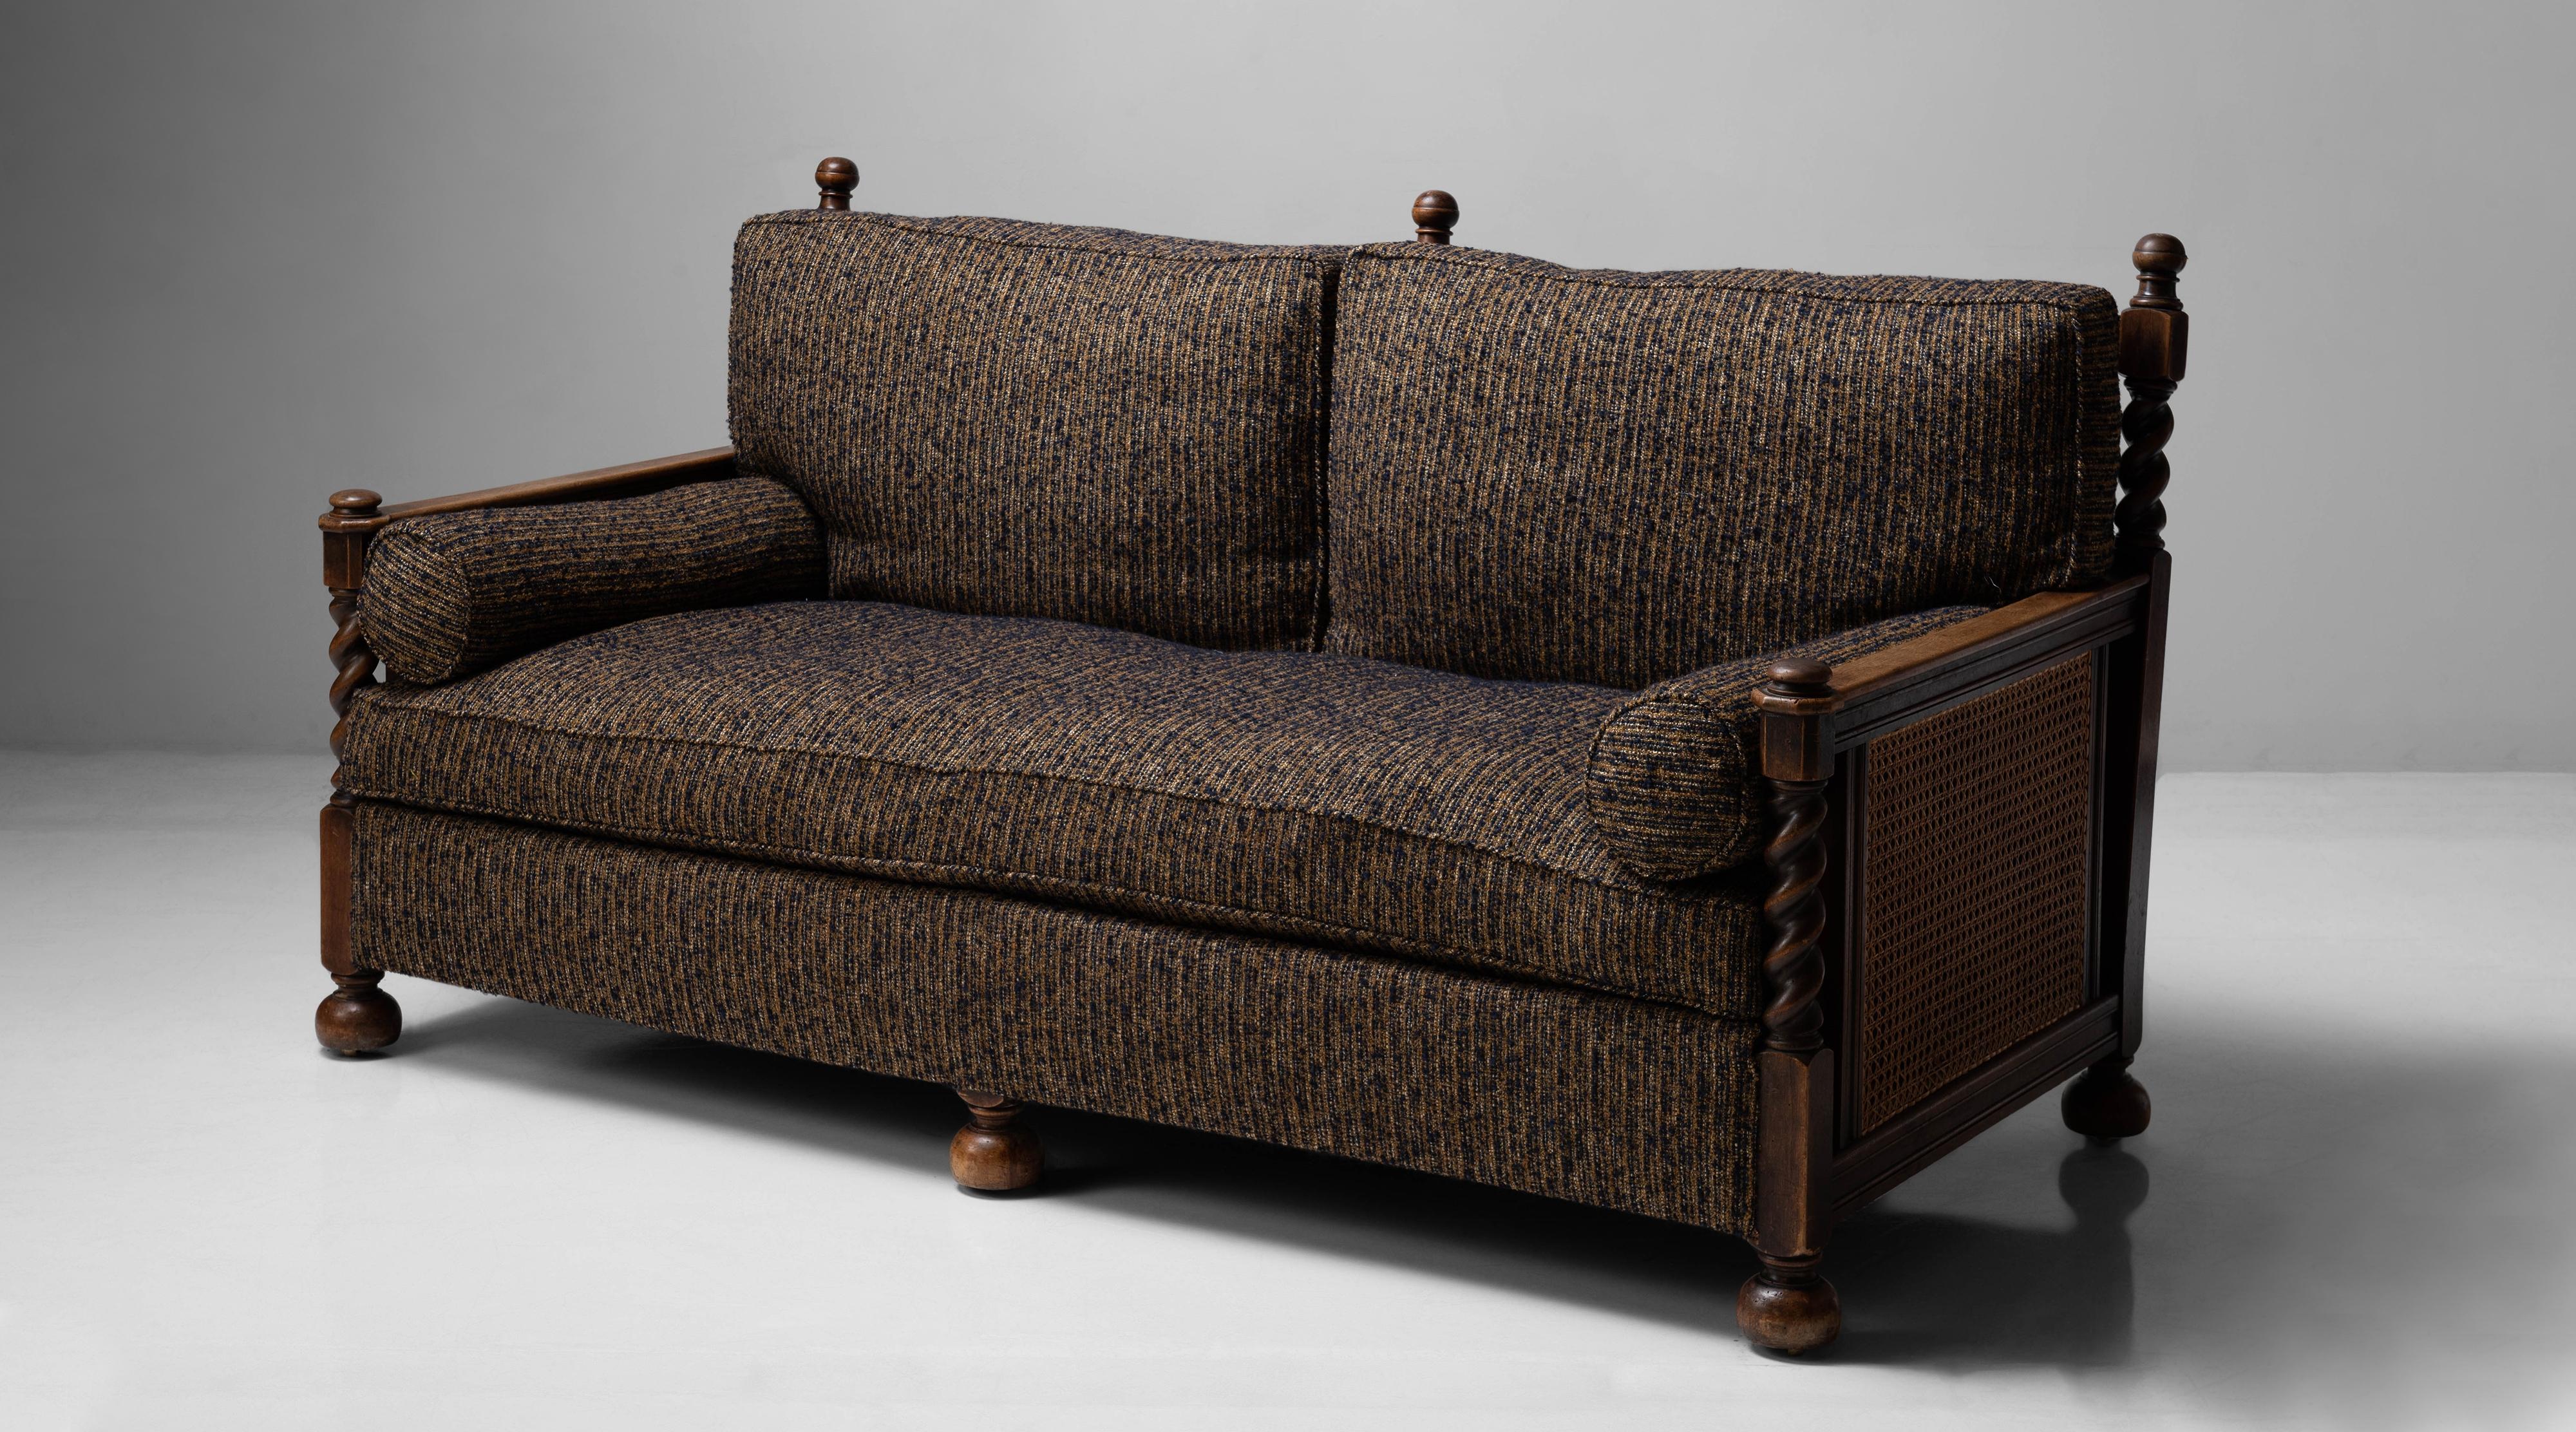 Newly upholstered cushions, oak and hardwood frame with spiral carving and cane sides and back.


Measures: 72.5